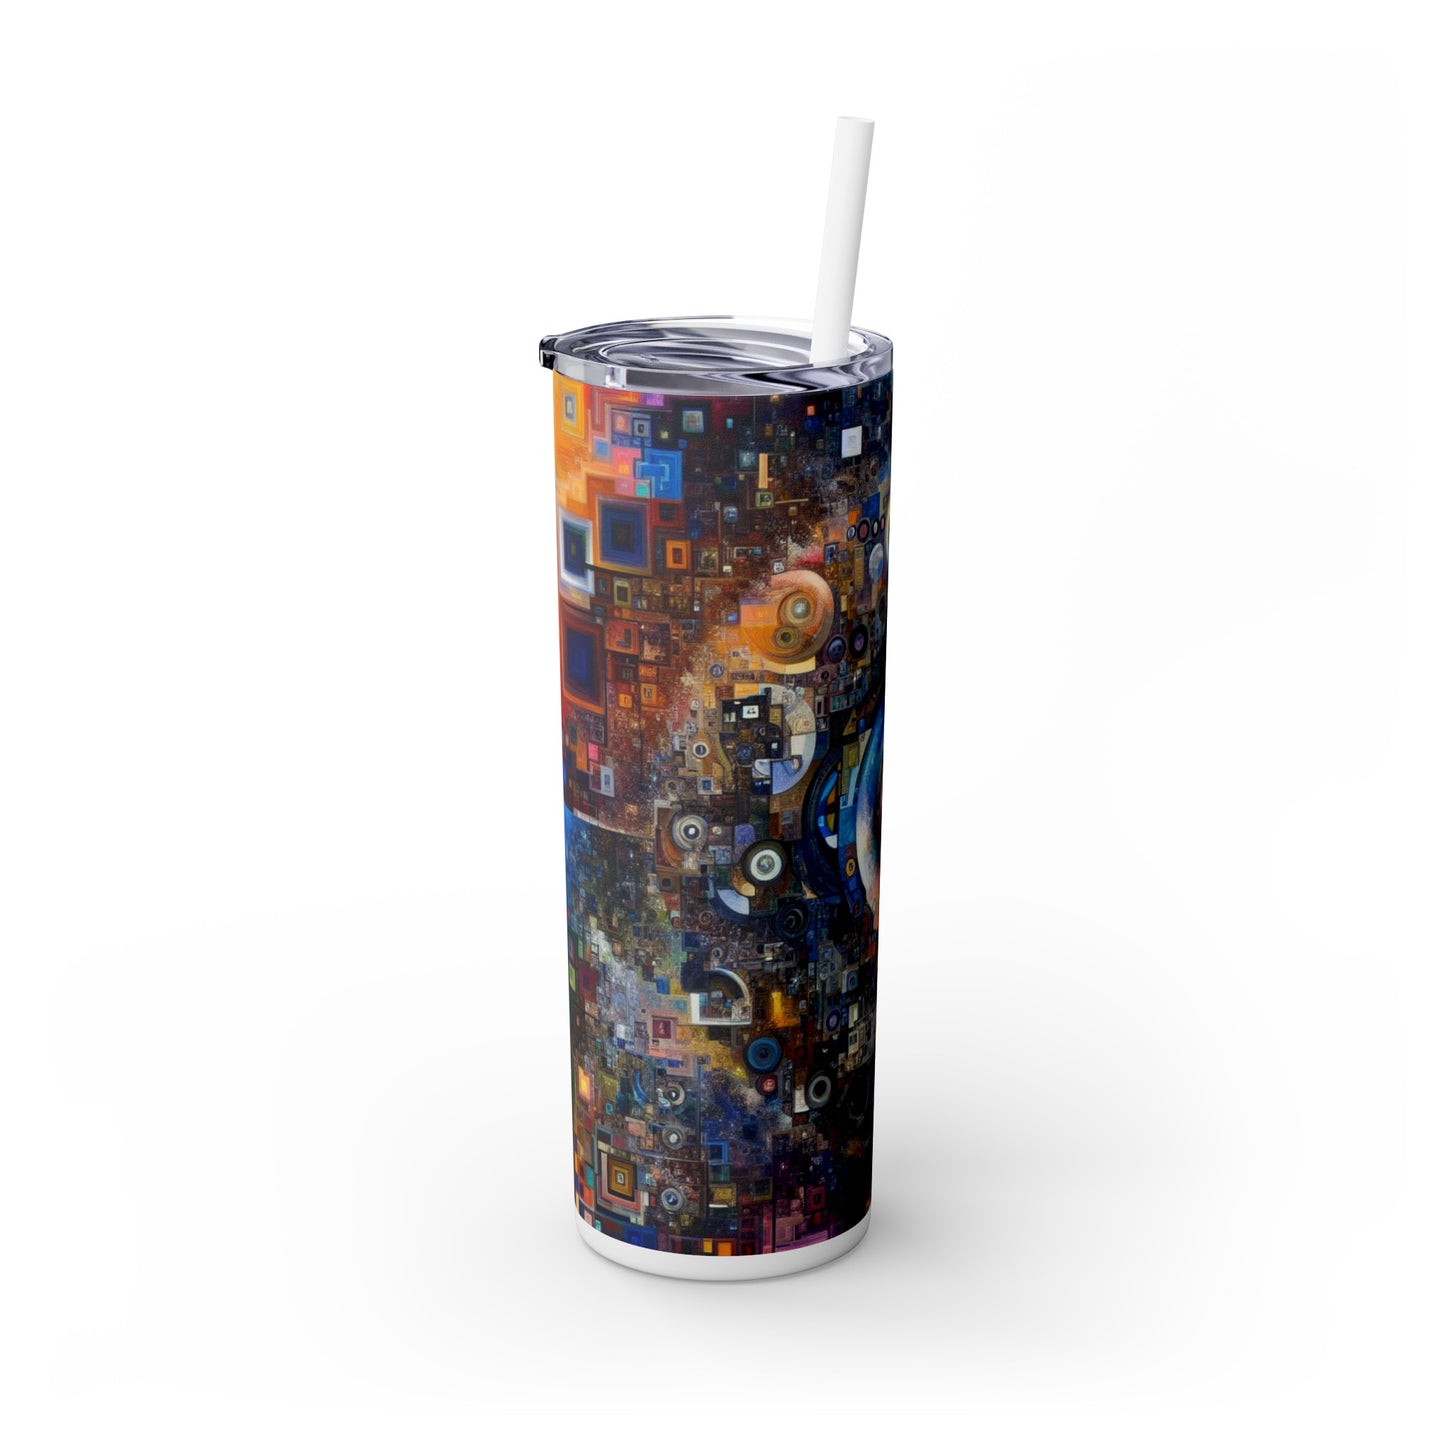 "Perception Distorted: A Postmodern Commentary on Reality" - The Alien Maars® Skinny Tumbler with Straw 20oz Postmodern Art